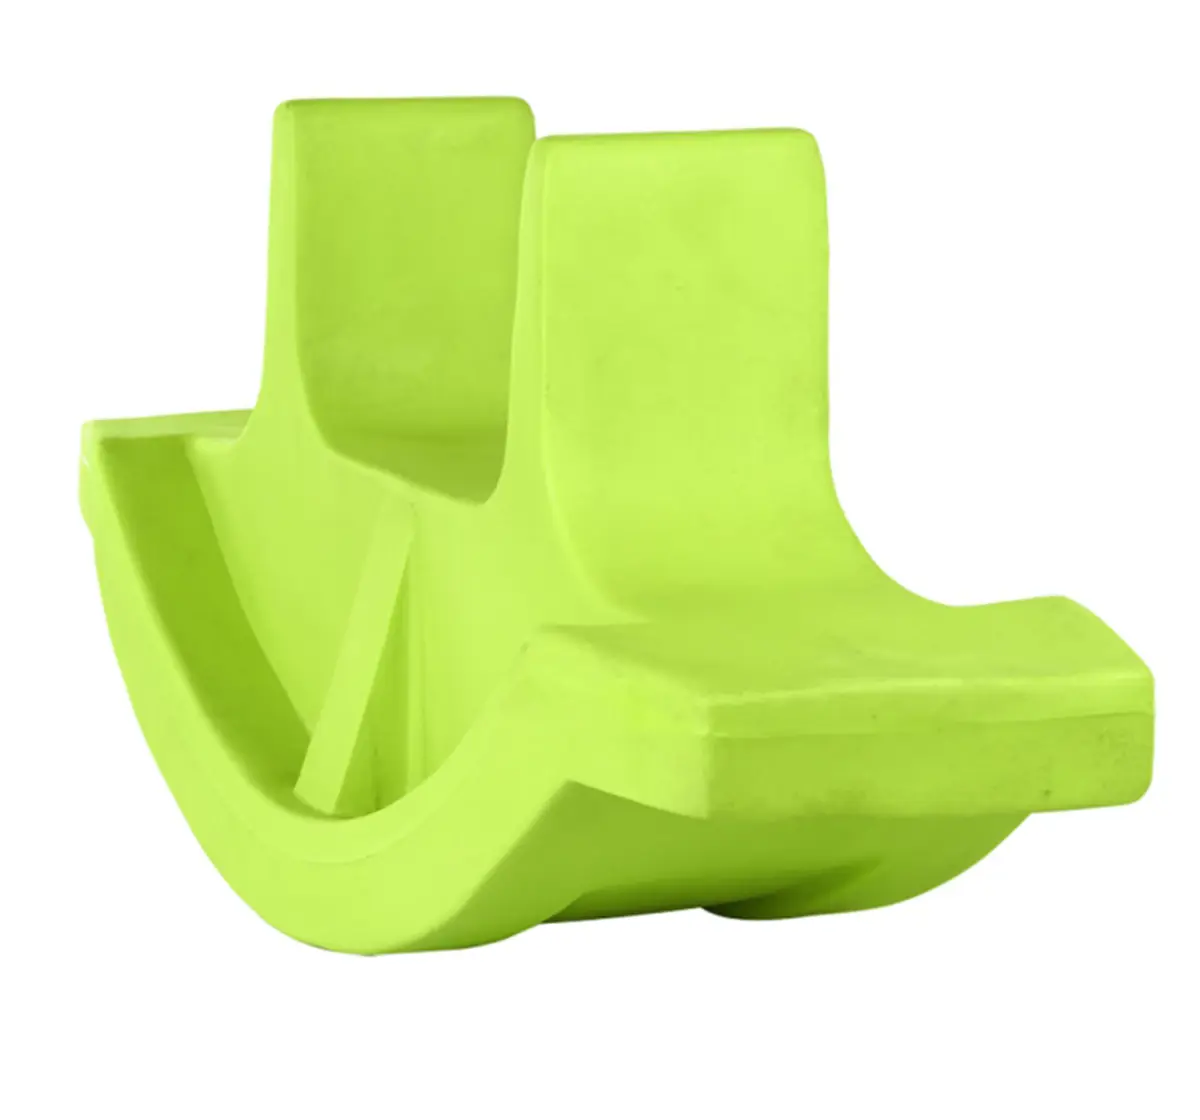 Ok Play Rocker Small for Kids Plastic Boat Ride On Toy Green 3Y+